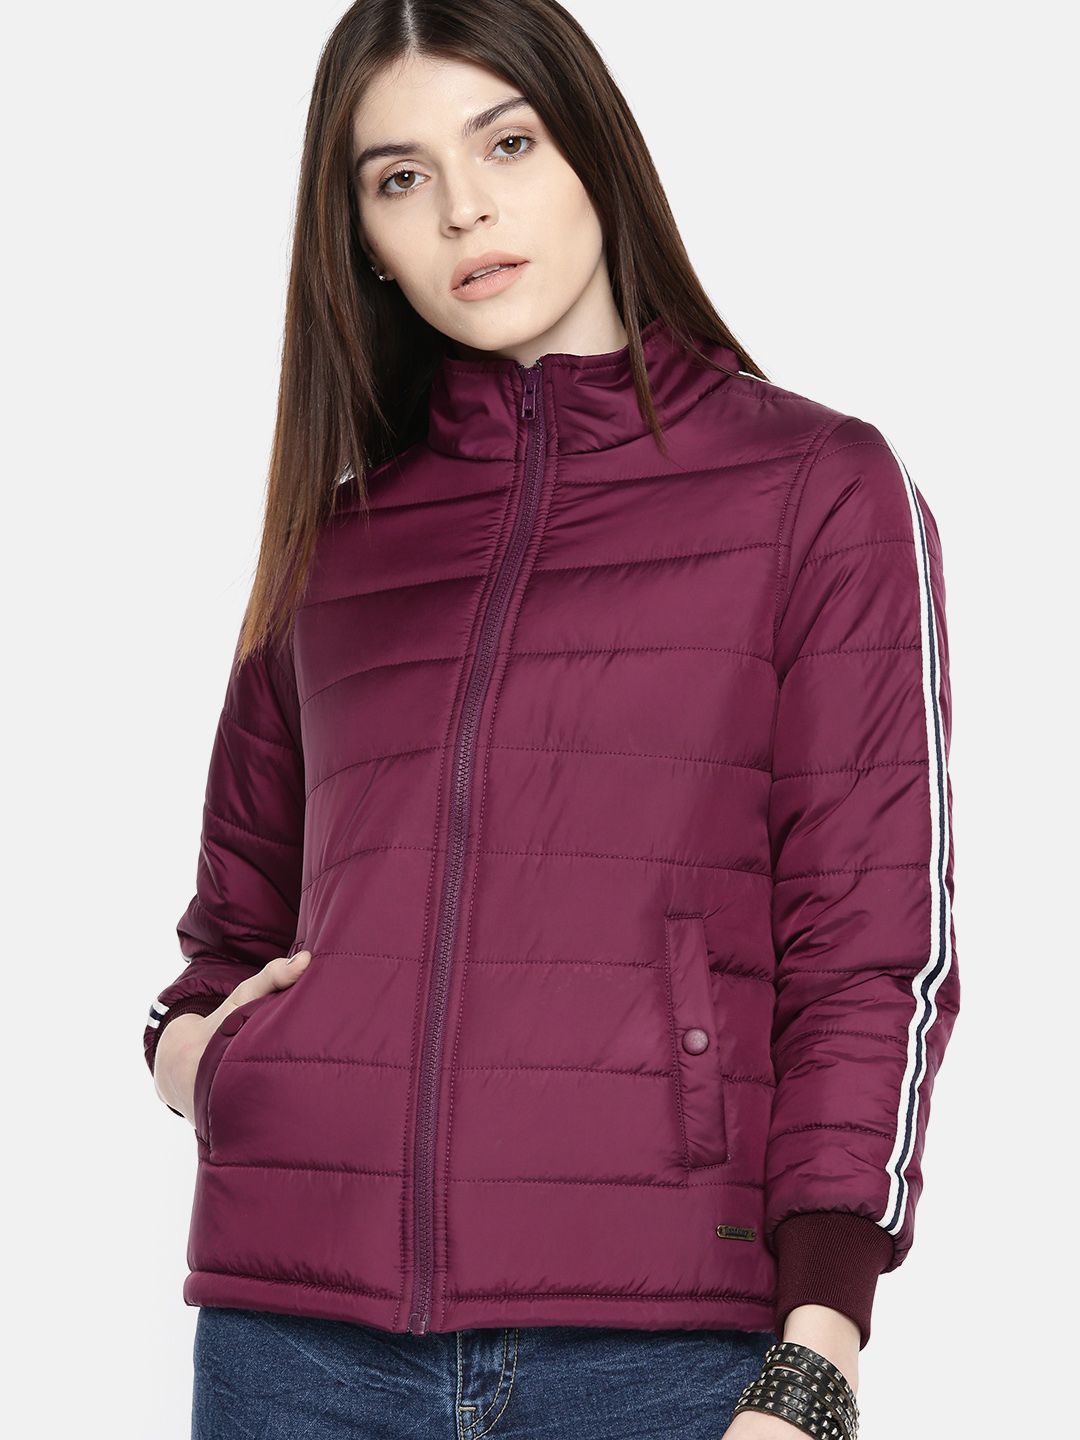 The Roadster Lifestyle Co Women Burgundy Solid Jacket Price in India